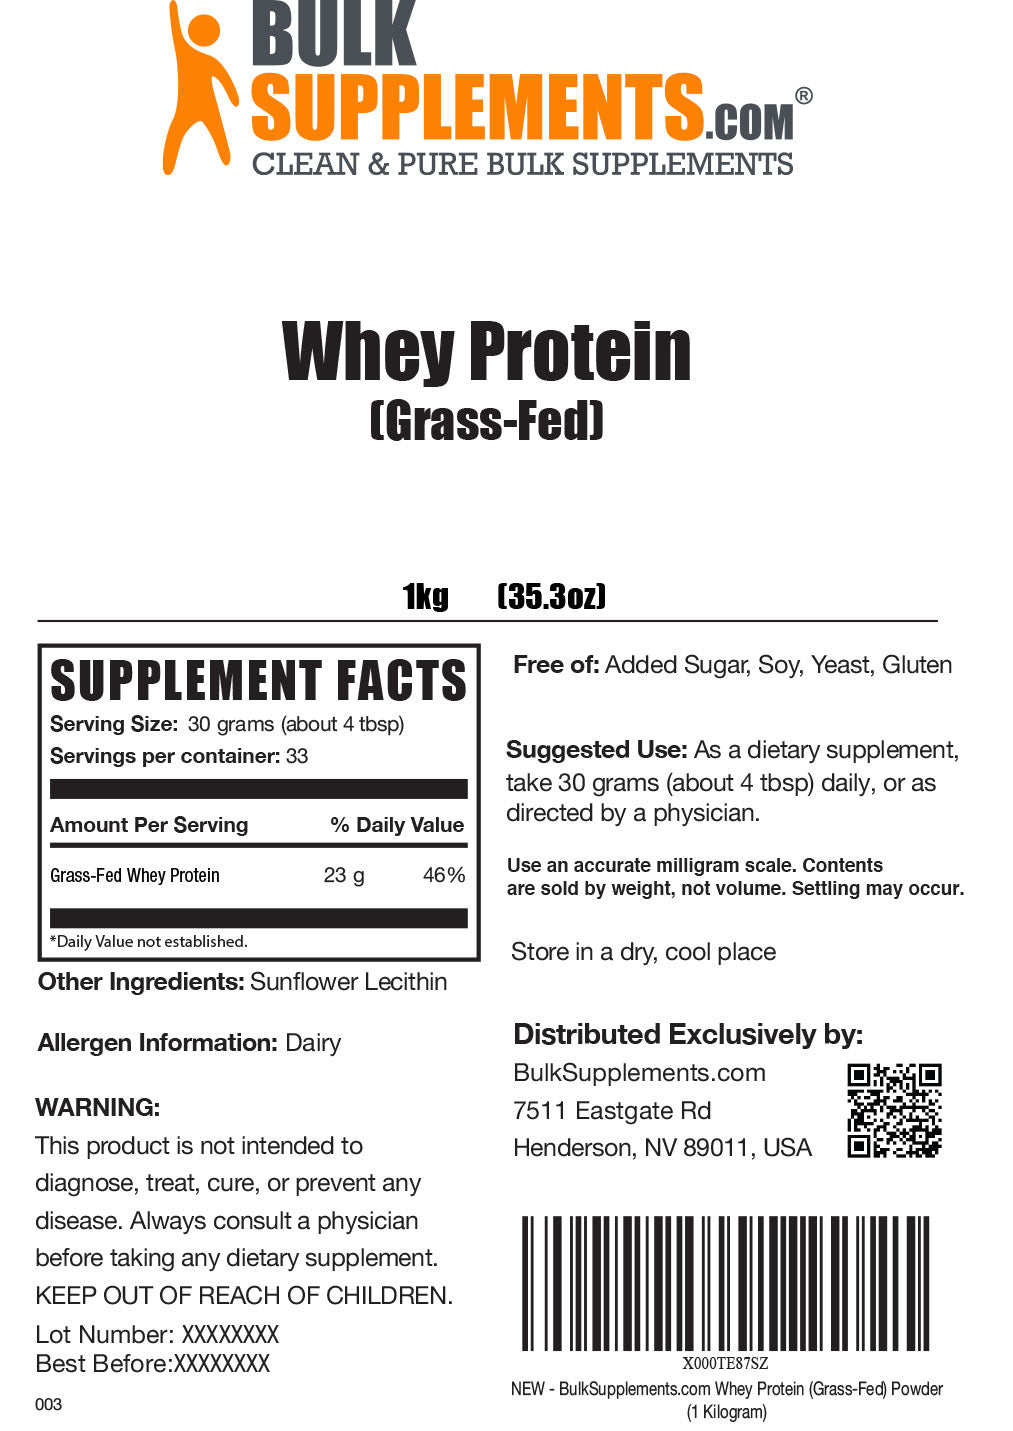 Grass-Fed Whey Protein Supplement Facts